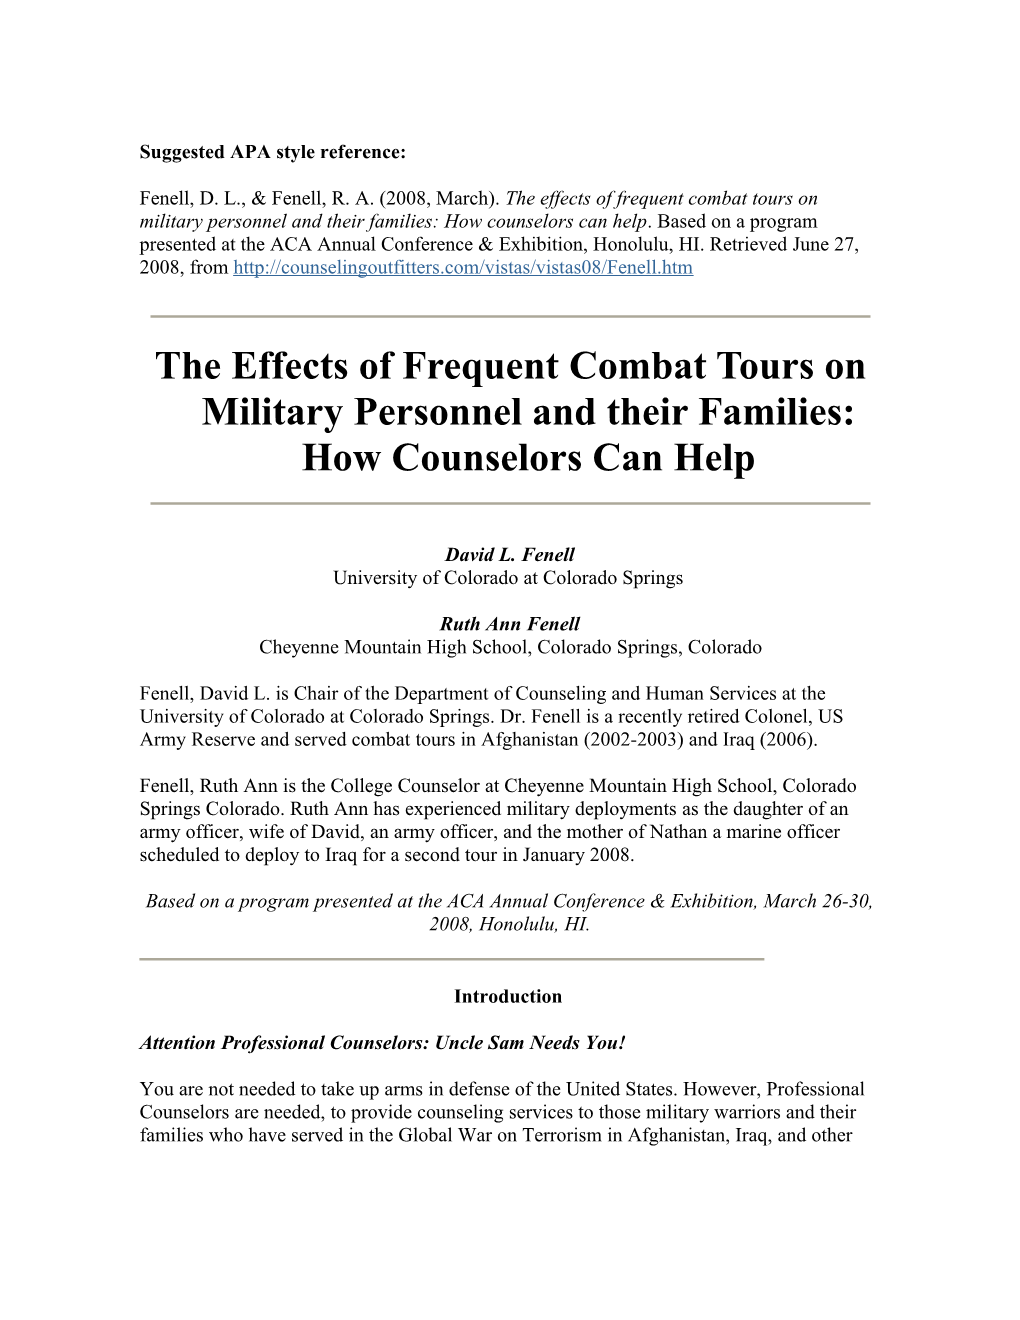 The Effects of Frequent Combat Tours on Military Personnel and Their Families: How Counselors